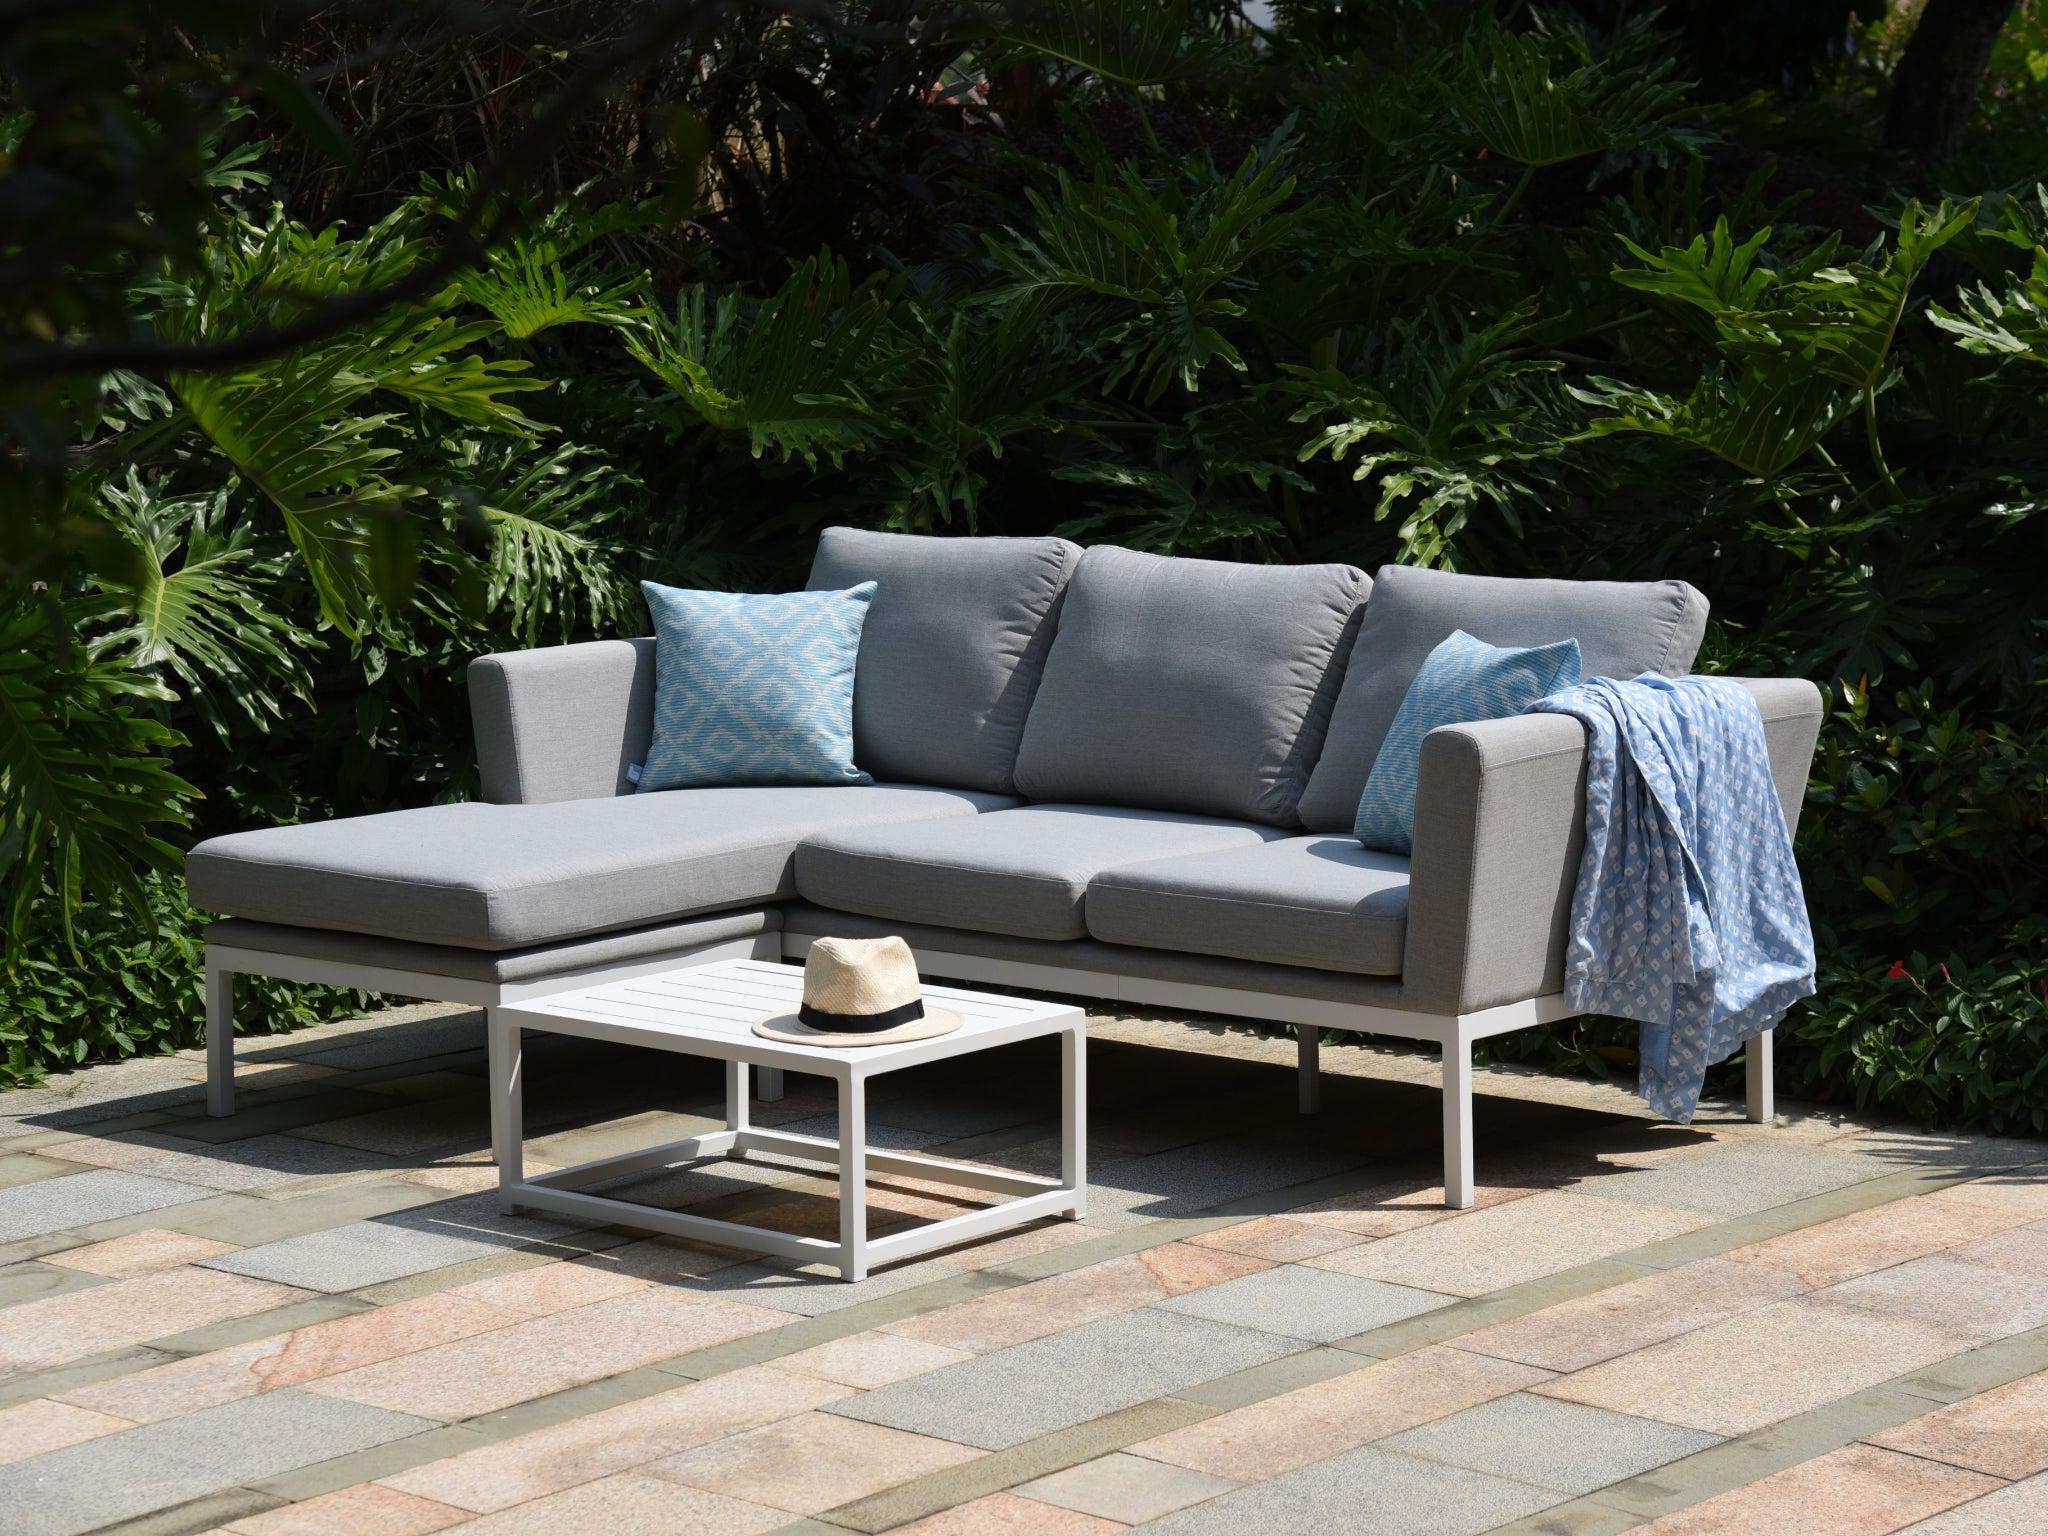 SIMPO Pulse 4-Piece Outdoor Chaise Lounge Setting — Lead Chiné